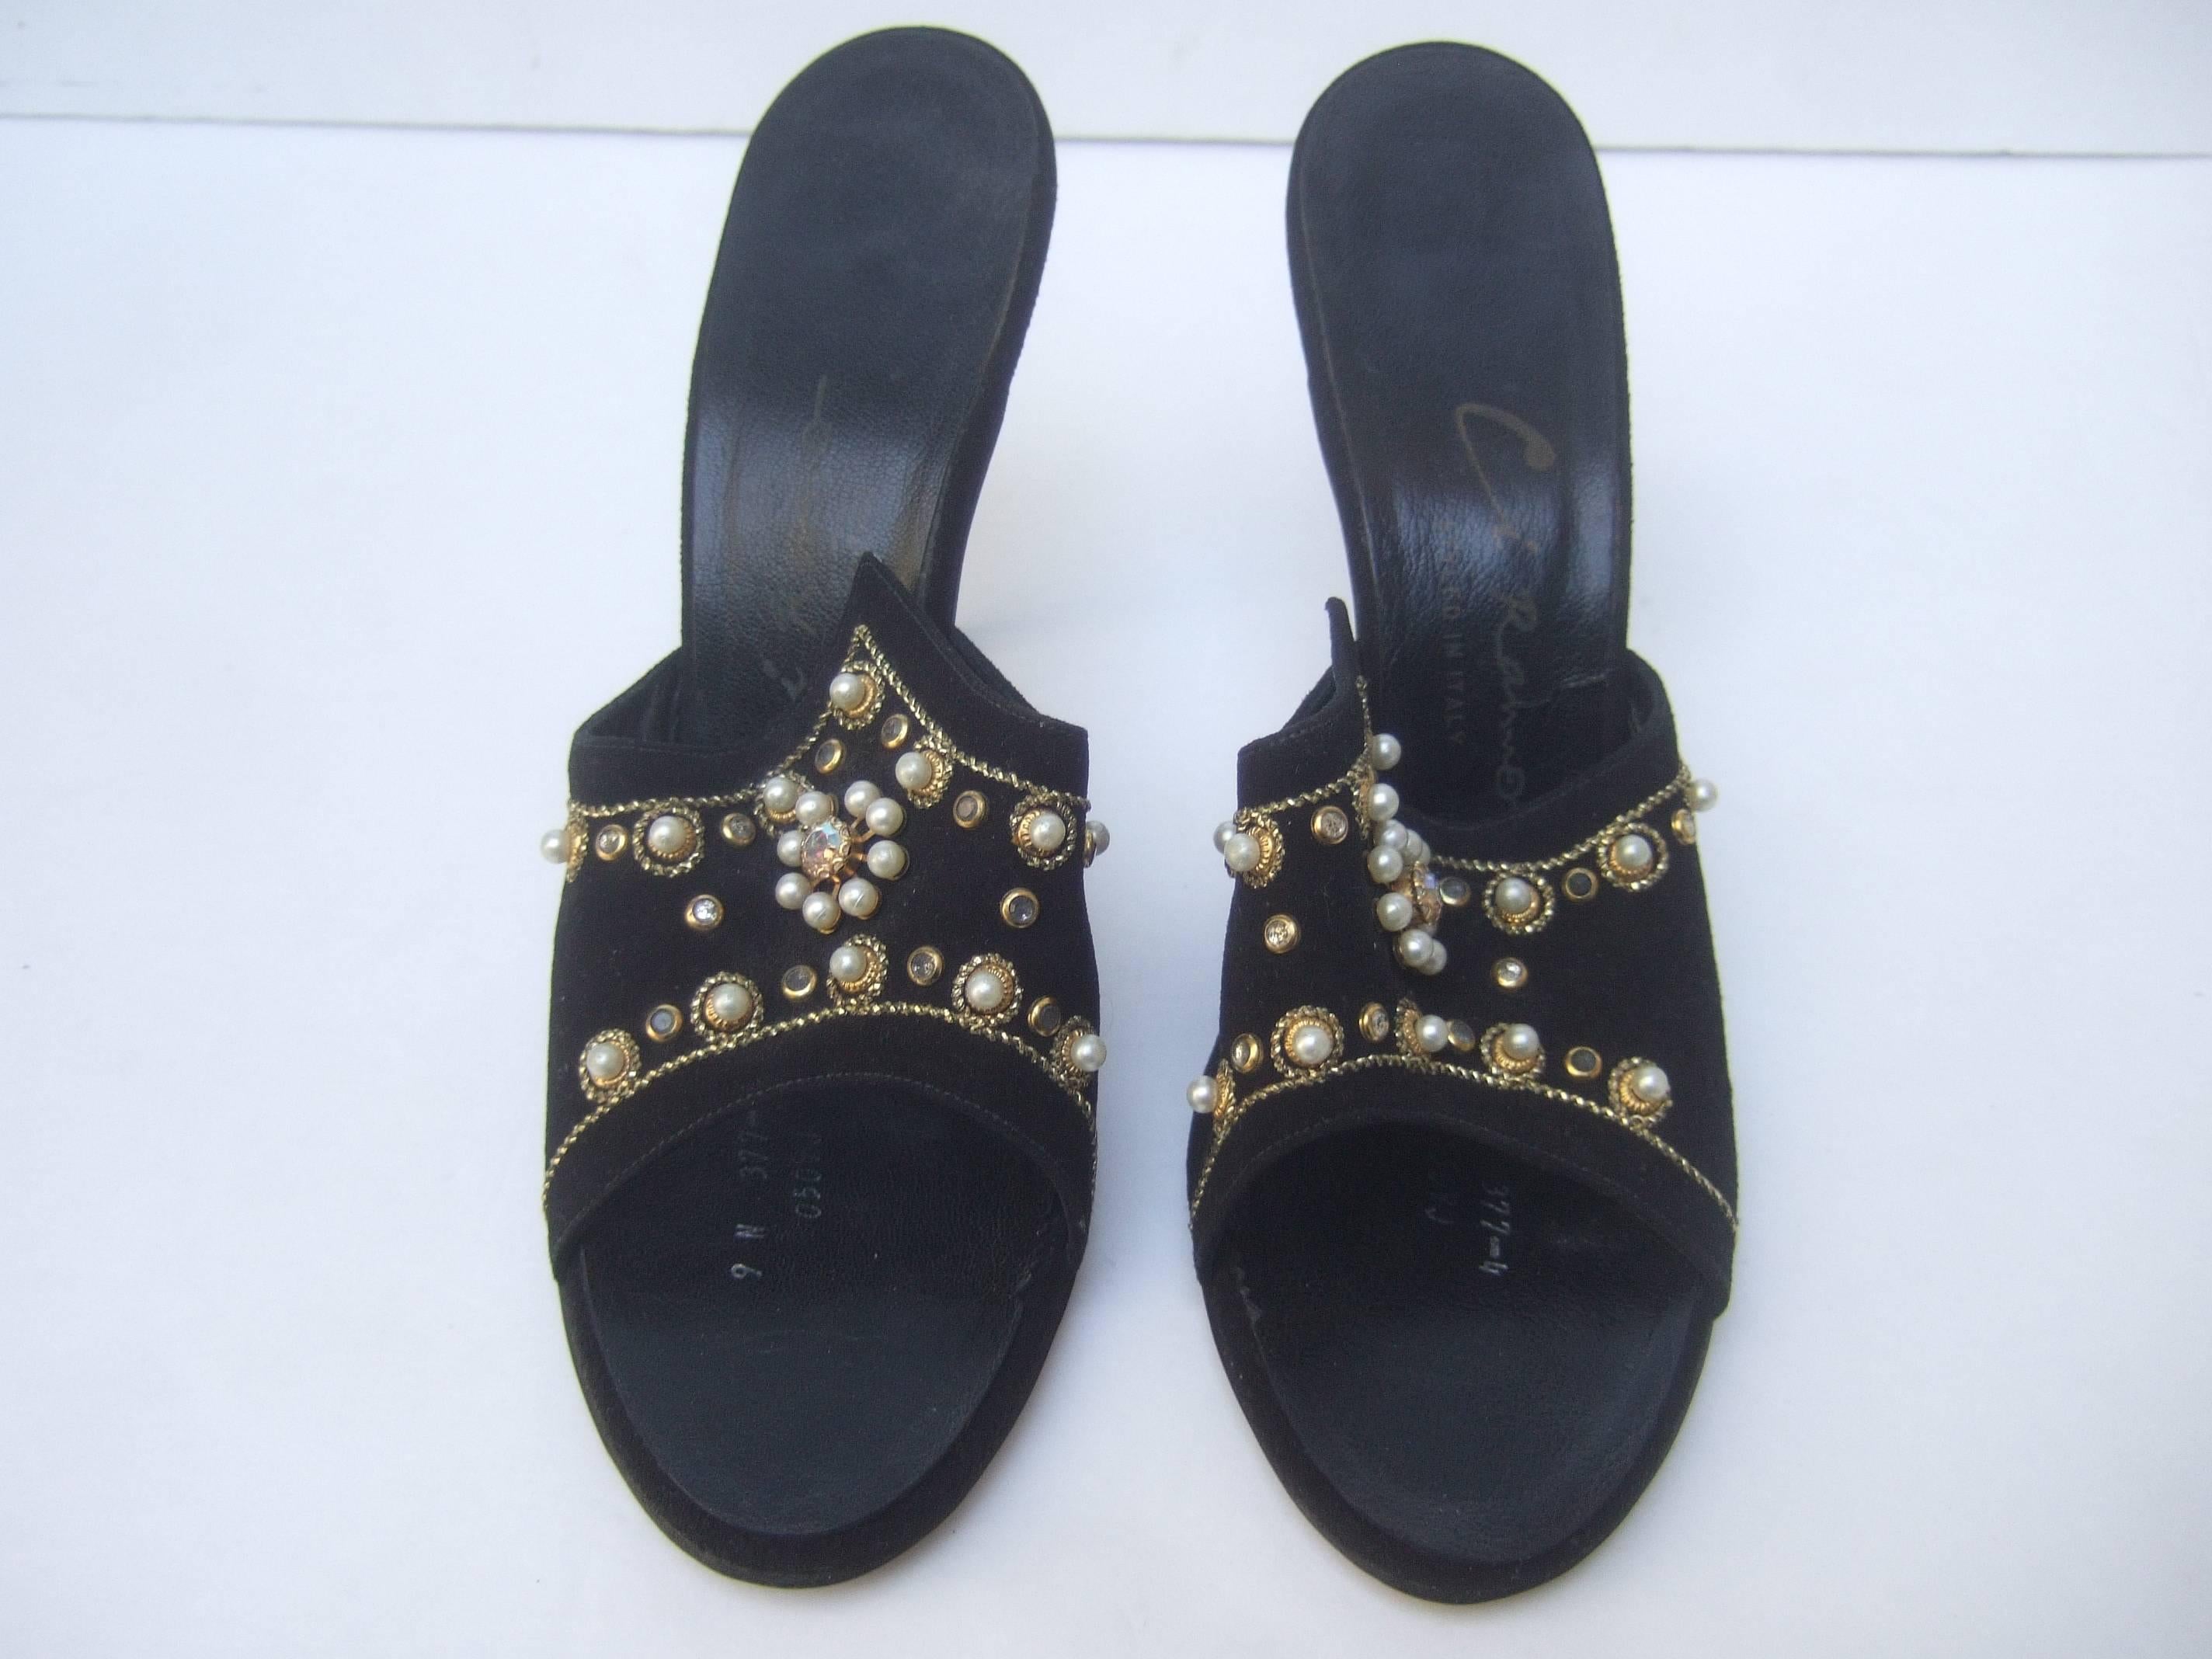 Jeweled Vintage Black Suede Mules Made in Italy ca 1960 In Good Condition For Sale In University City, MO